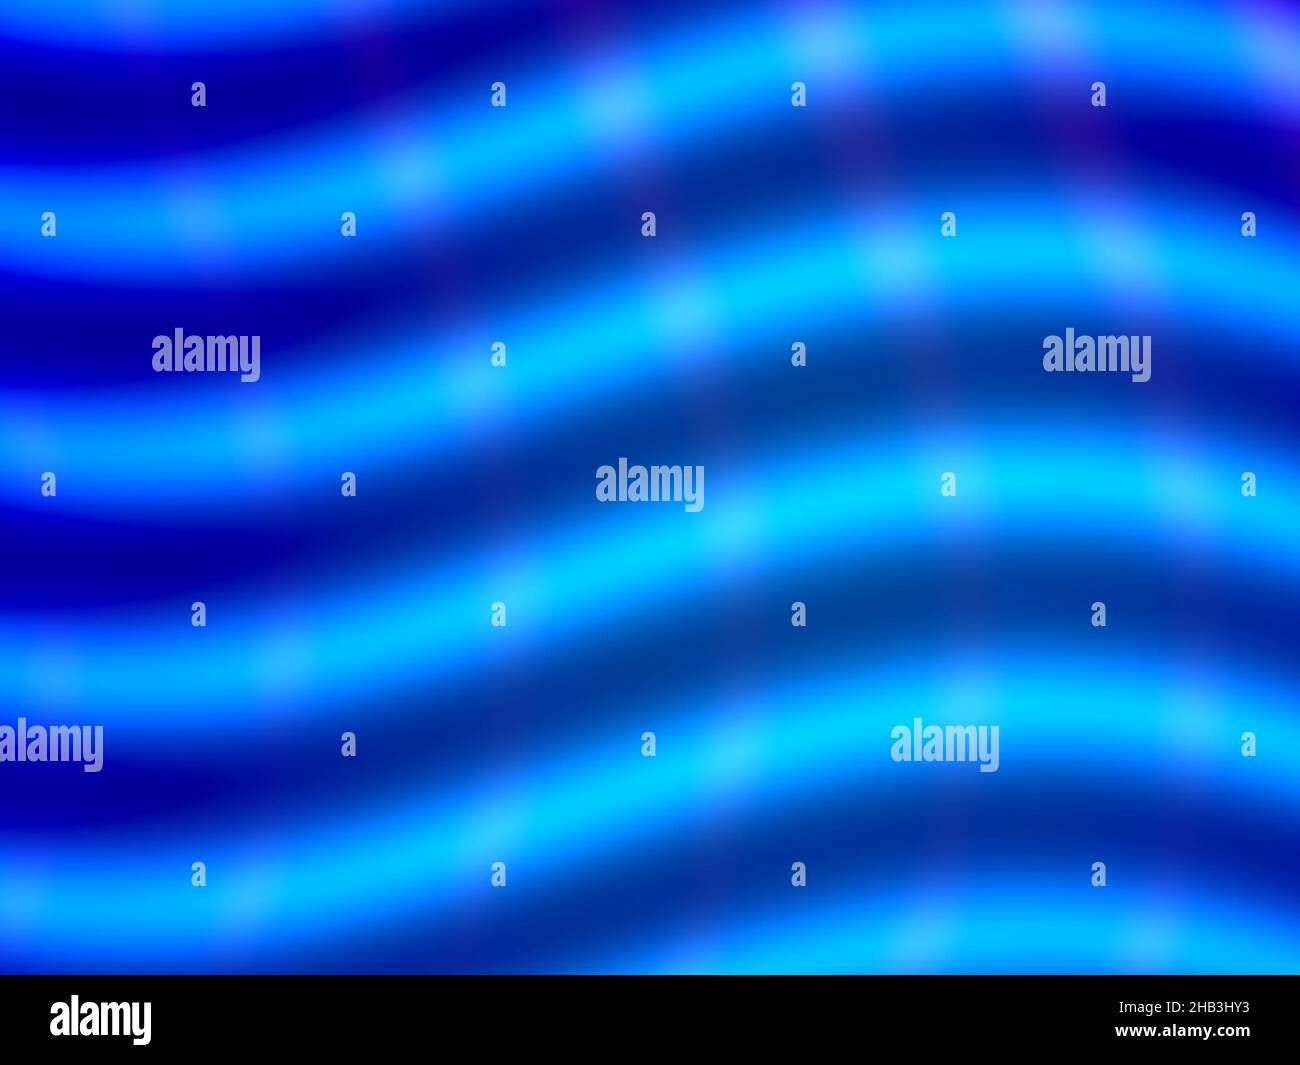 Abstract background, blue cyan vibrant gradient wave decorative creative illustration Stock Photo